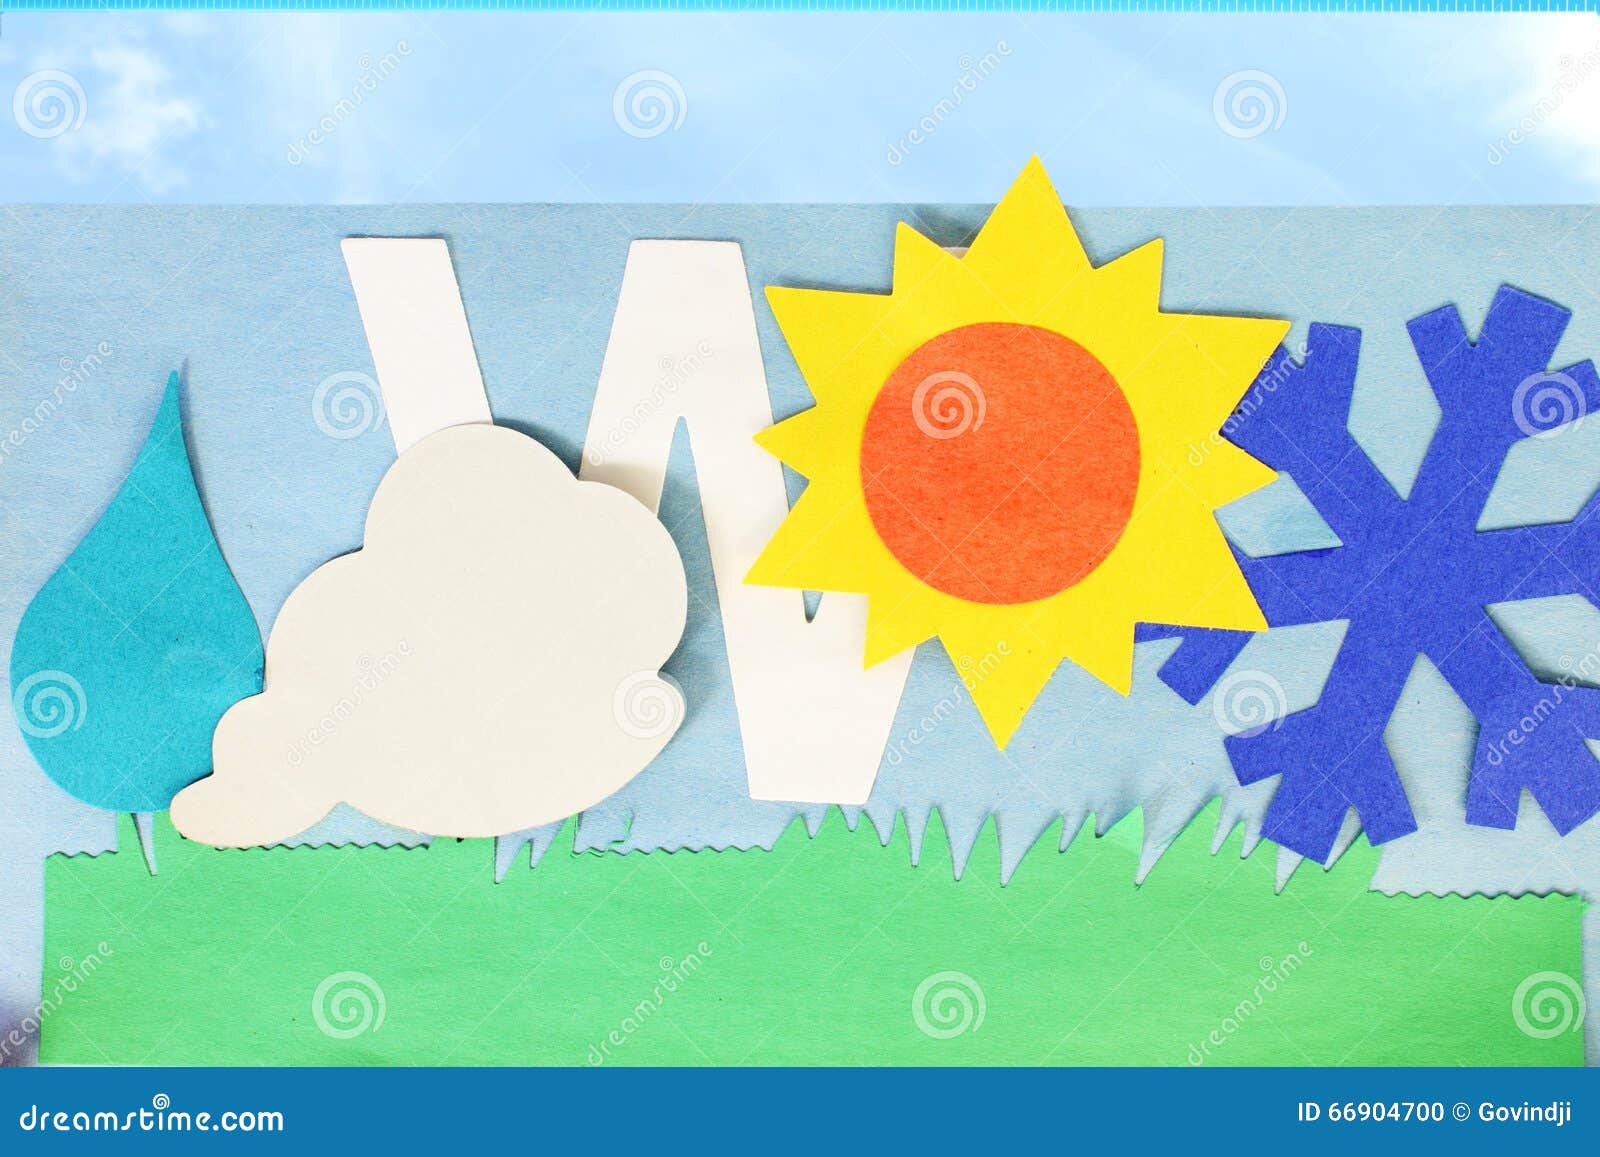 Weather Icons Kids School Paper Craft Stock Photo - Image of background,  grunge: 66904700